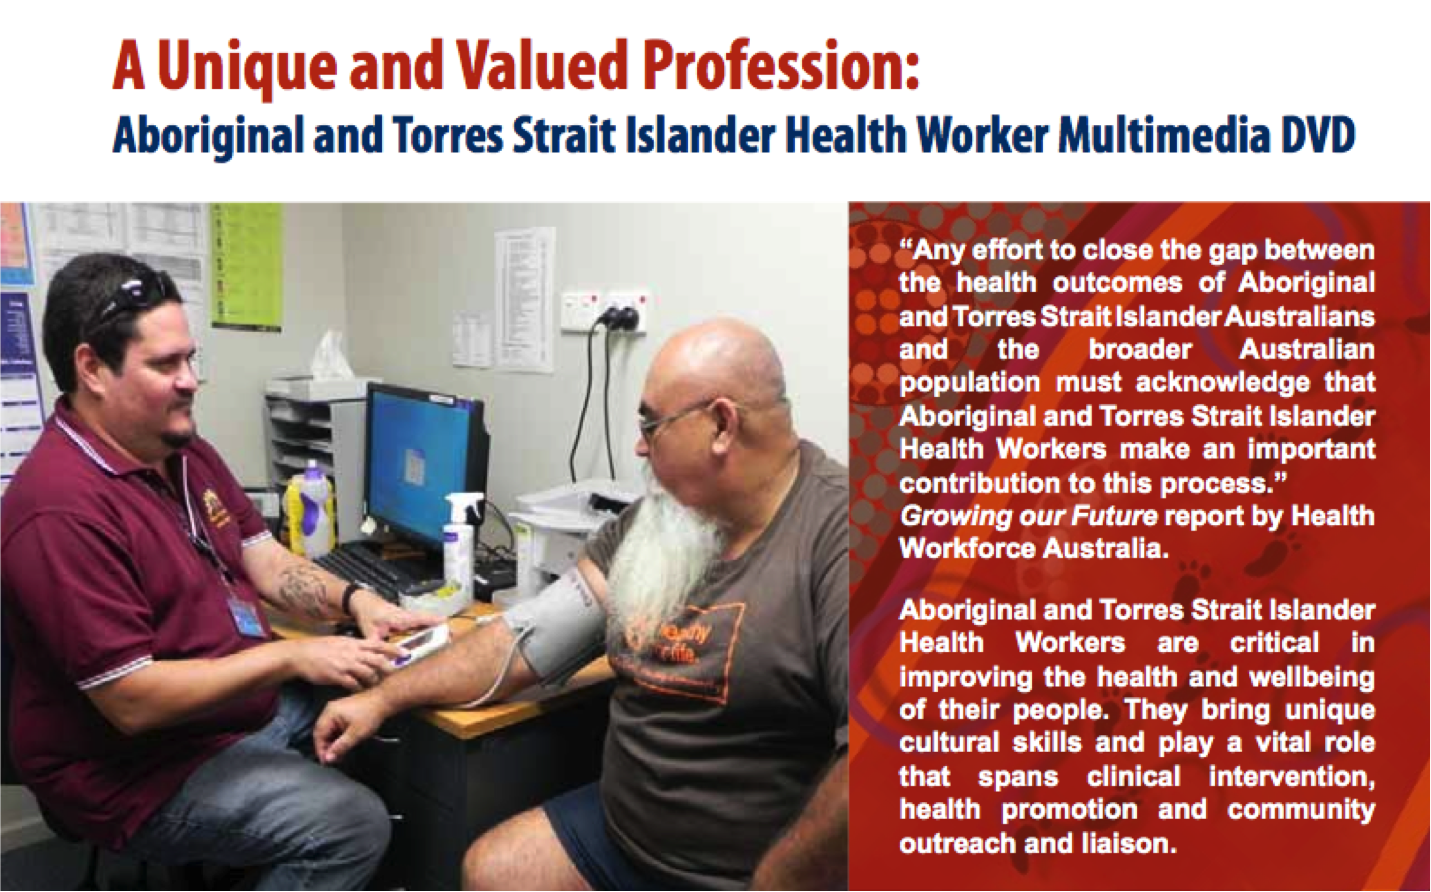 A unique and valued profession:  Aboriginal and Torres Strait Islander Health Worker Multimedia DVD